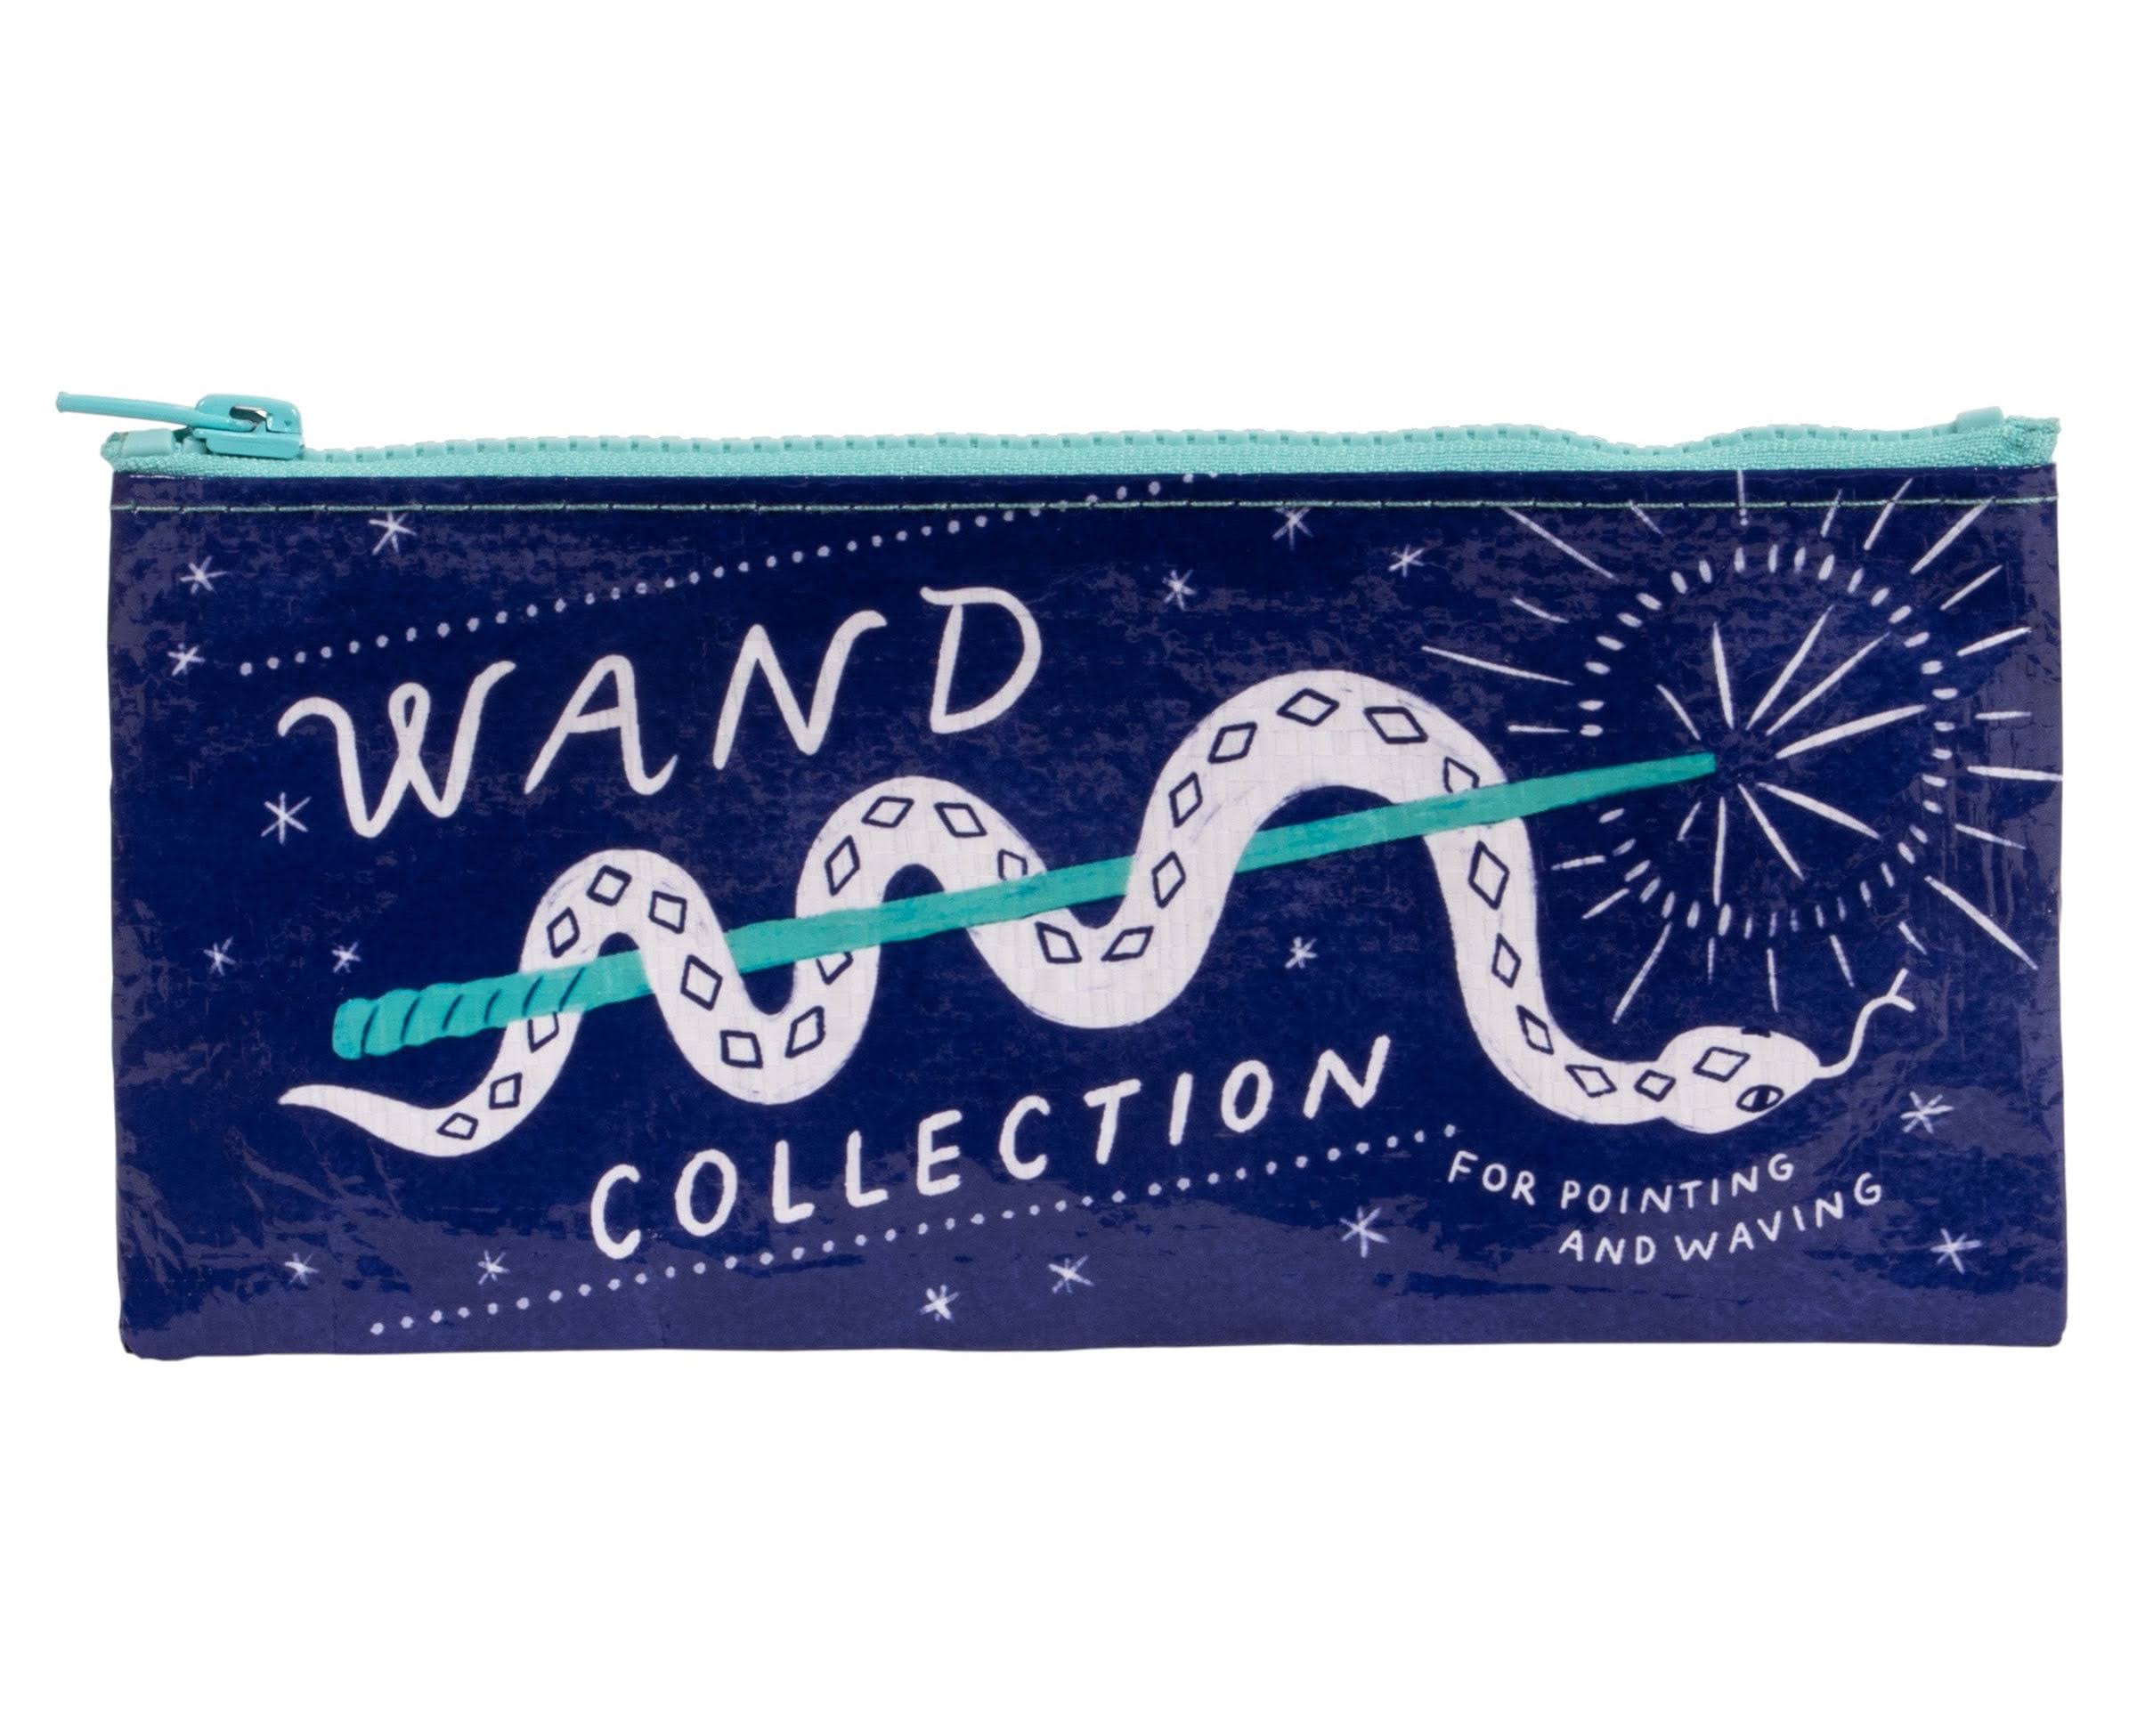 Wand Collection Pencil Case - AfterPay & zipPay Available